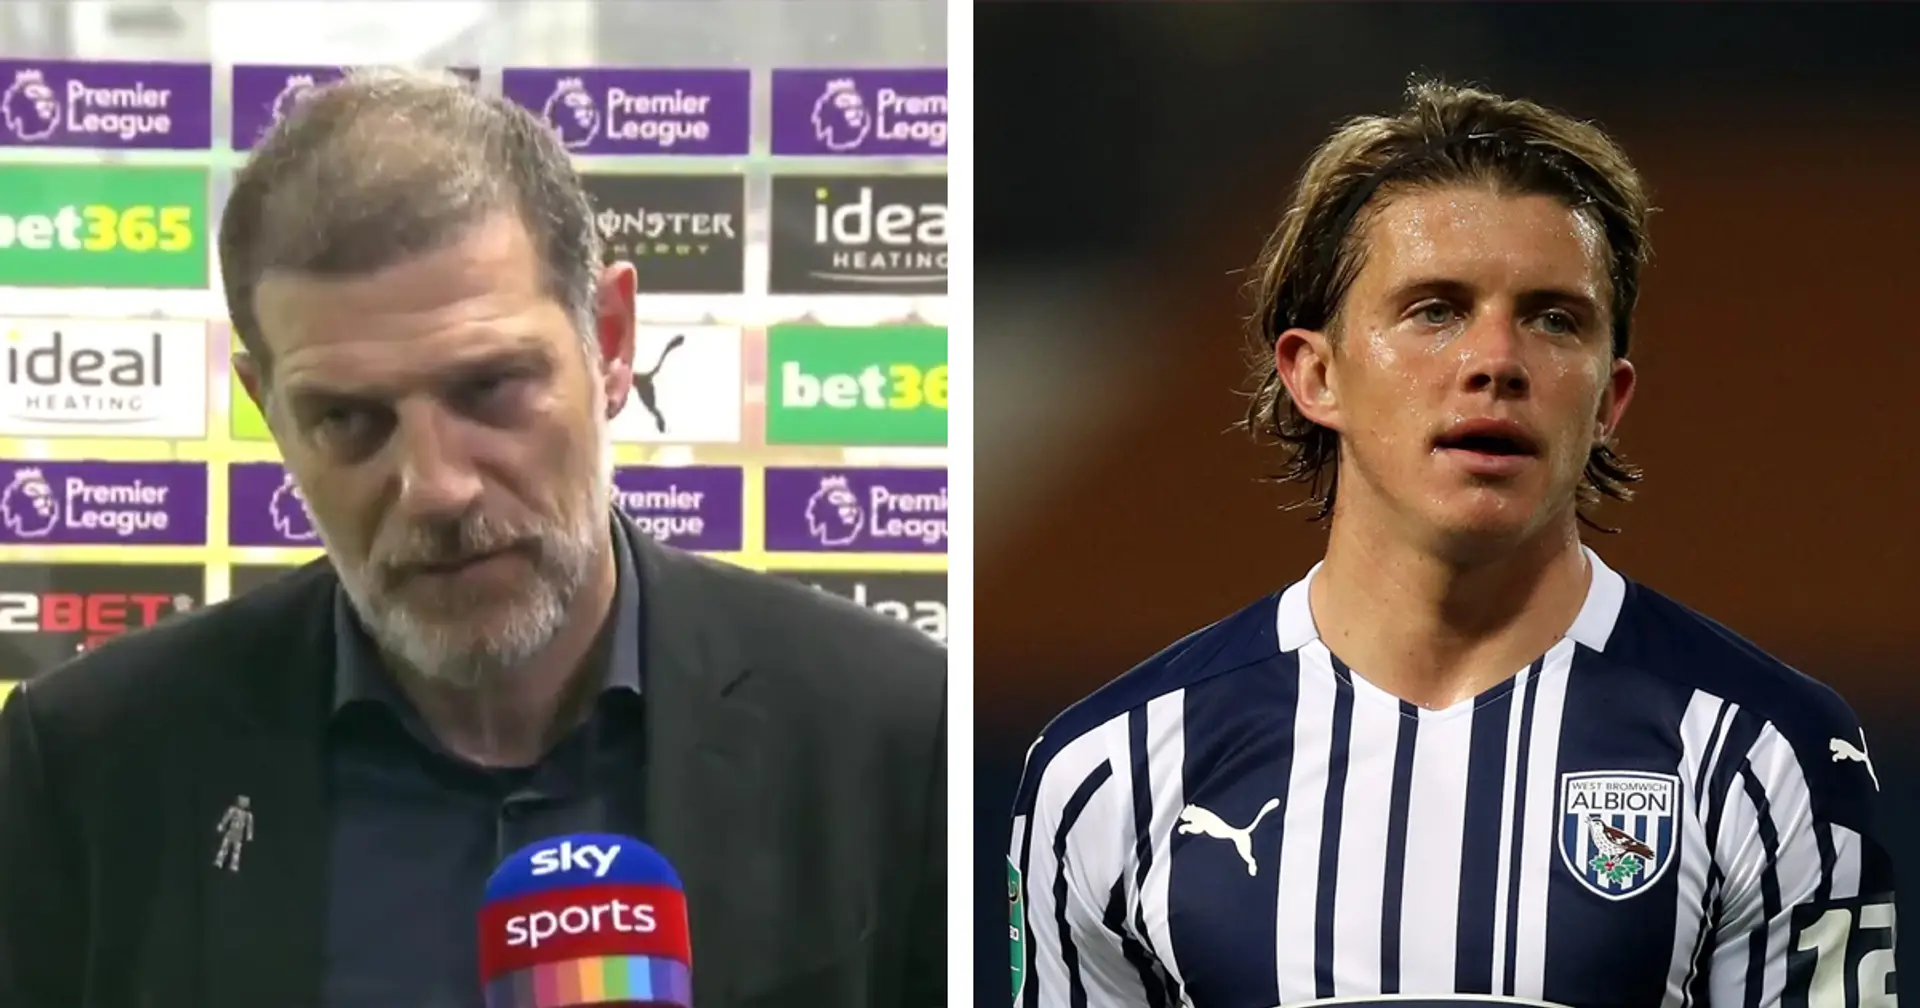 'He's got a massive career in front of him. Massive': West Brom boss Slaven Bilic raves about Conor Gallagher